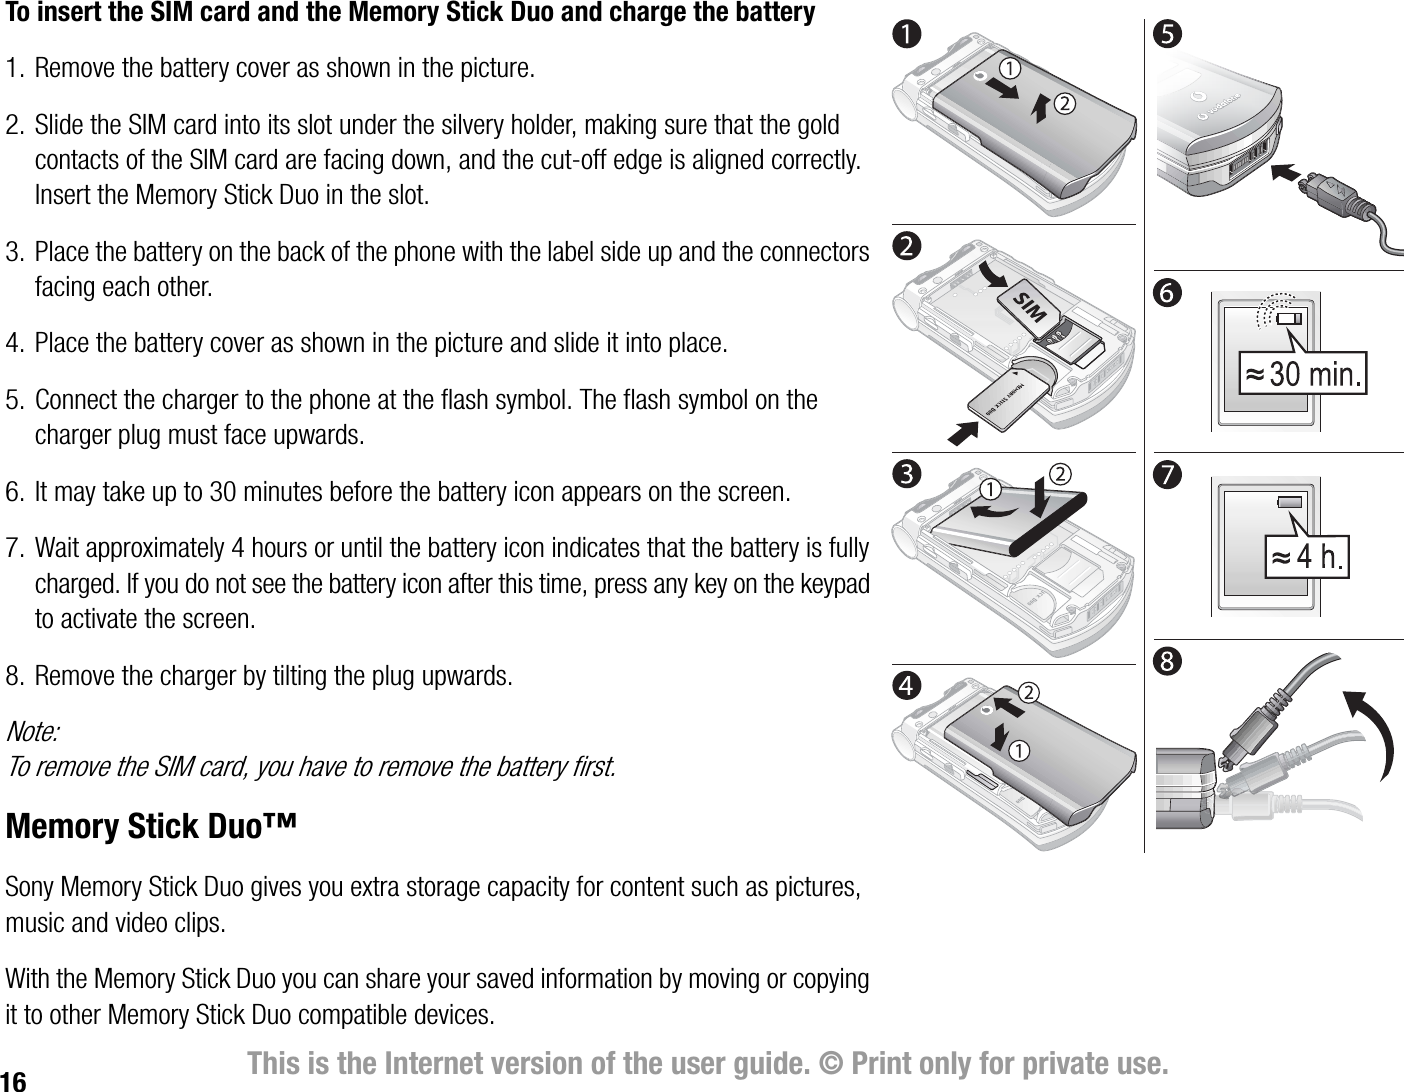 16 This is the Internet version of the user guide. © Print only for private use.To insert the SIM card and the Memory Stick Duo and charge the battery1. Remove the battery cover as shown in the picture.2. Slide the SIM card into its slot under the silvery holder, making sure that the gold contacts of the SIM card are facing down, and the cutoff edge is aligned correctly. Insert the Memory Stick Duo in the slot.3. Place the battery on the back of the phone with the label side up and the connectors facing each other.4. Place the battery cover as shown in the picture and slide it into place.5. Connect the charger to the phone at the flash symbol. The flash symbol on the charger plug must face upwards.6. It may take up to 30 minutes before the battery icon appears on the screen.7. Wait approximately 4 hours or until the battery icon indicates that the battery is fully charged. If you do not see the battery icon after this time, press any key on the keypad to activate the screen.8. Remove the charger by tilting the plug upwards.Note:To remove the SIM card, you have to remove the battery first.Memory Stick Duo™Sony Memory Stick Duo gives you extra storage capacity for content such as pictures, music and video clips.With the Memory Stick Duo you can share your saved information by moving or copying it to other Memory Stick Duo compatible devices. 